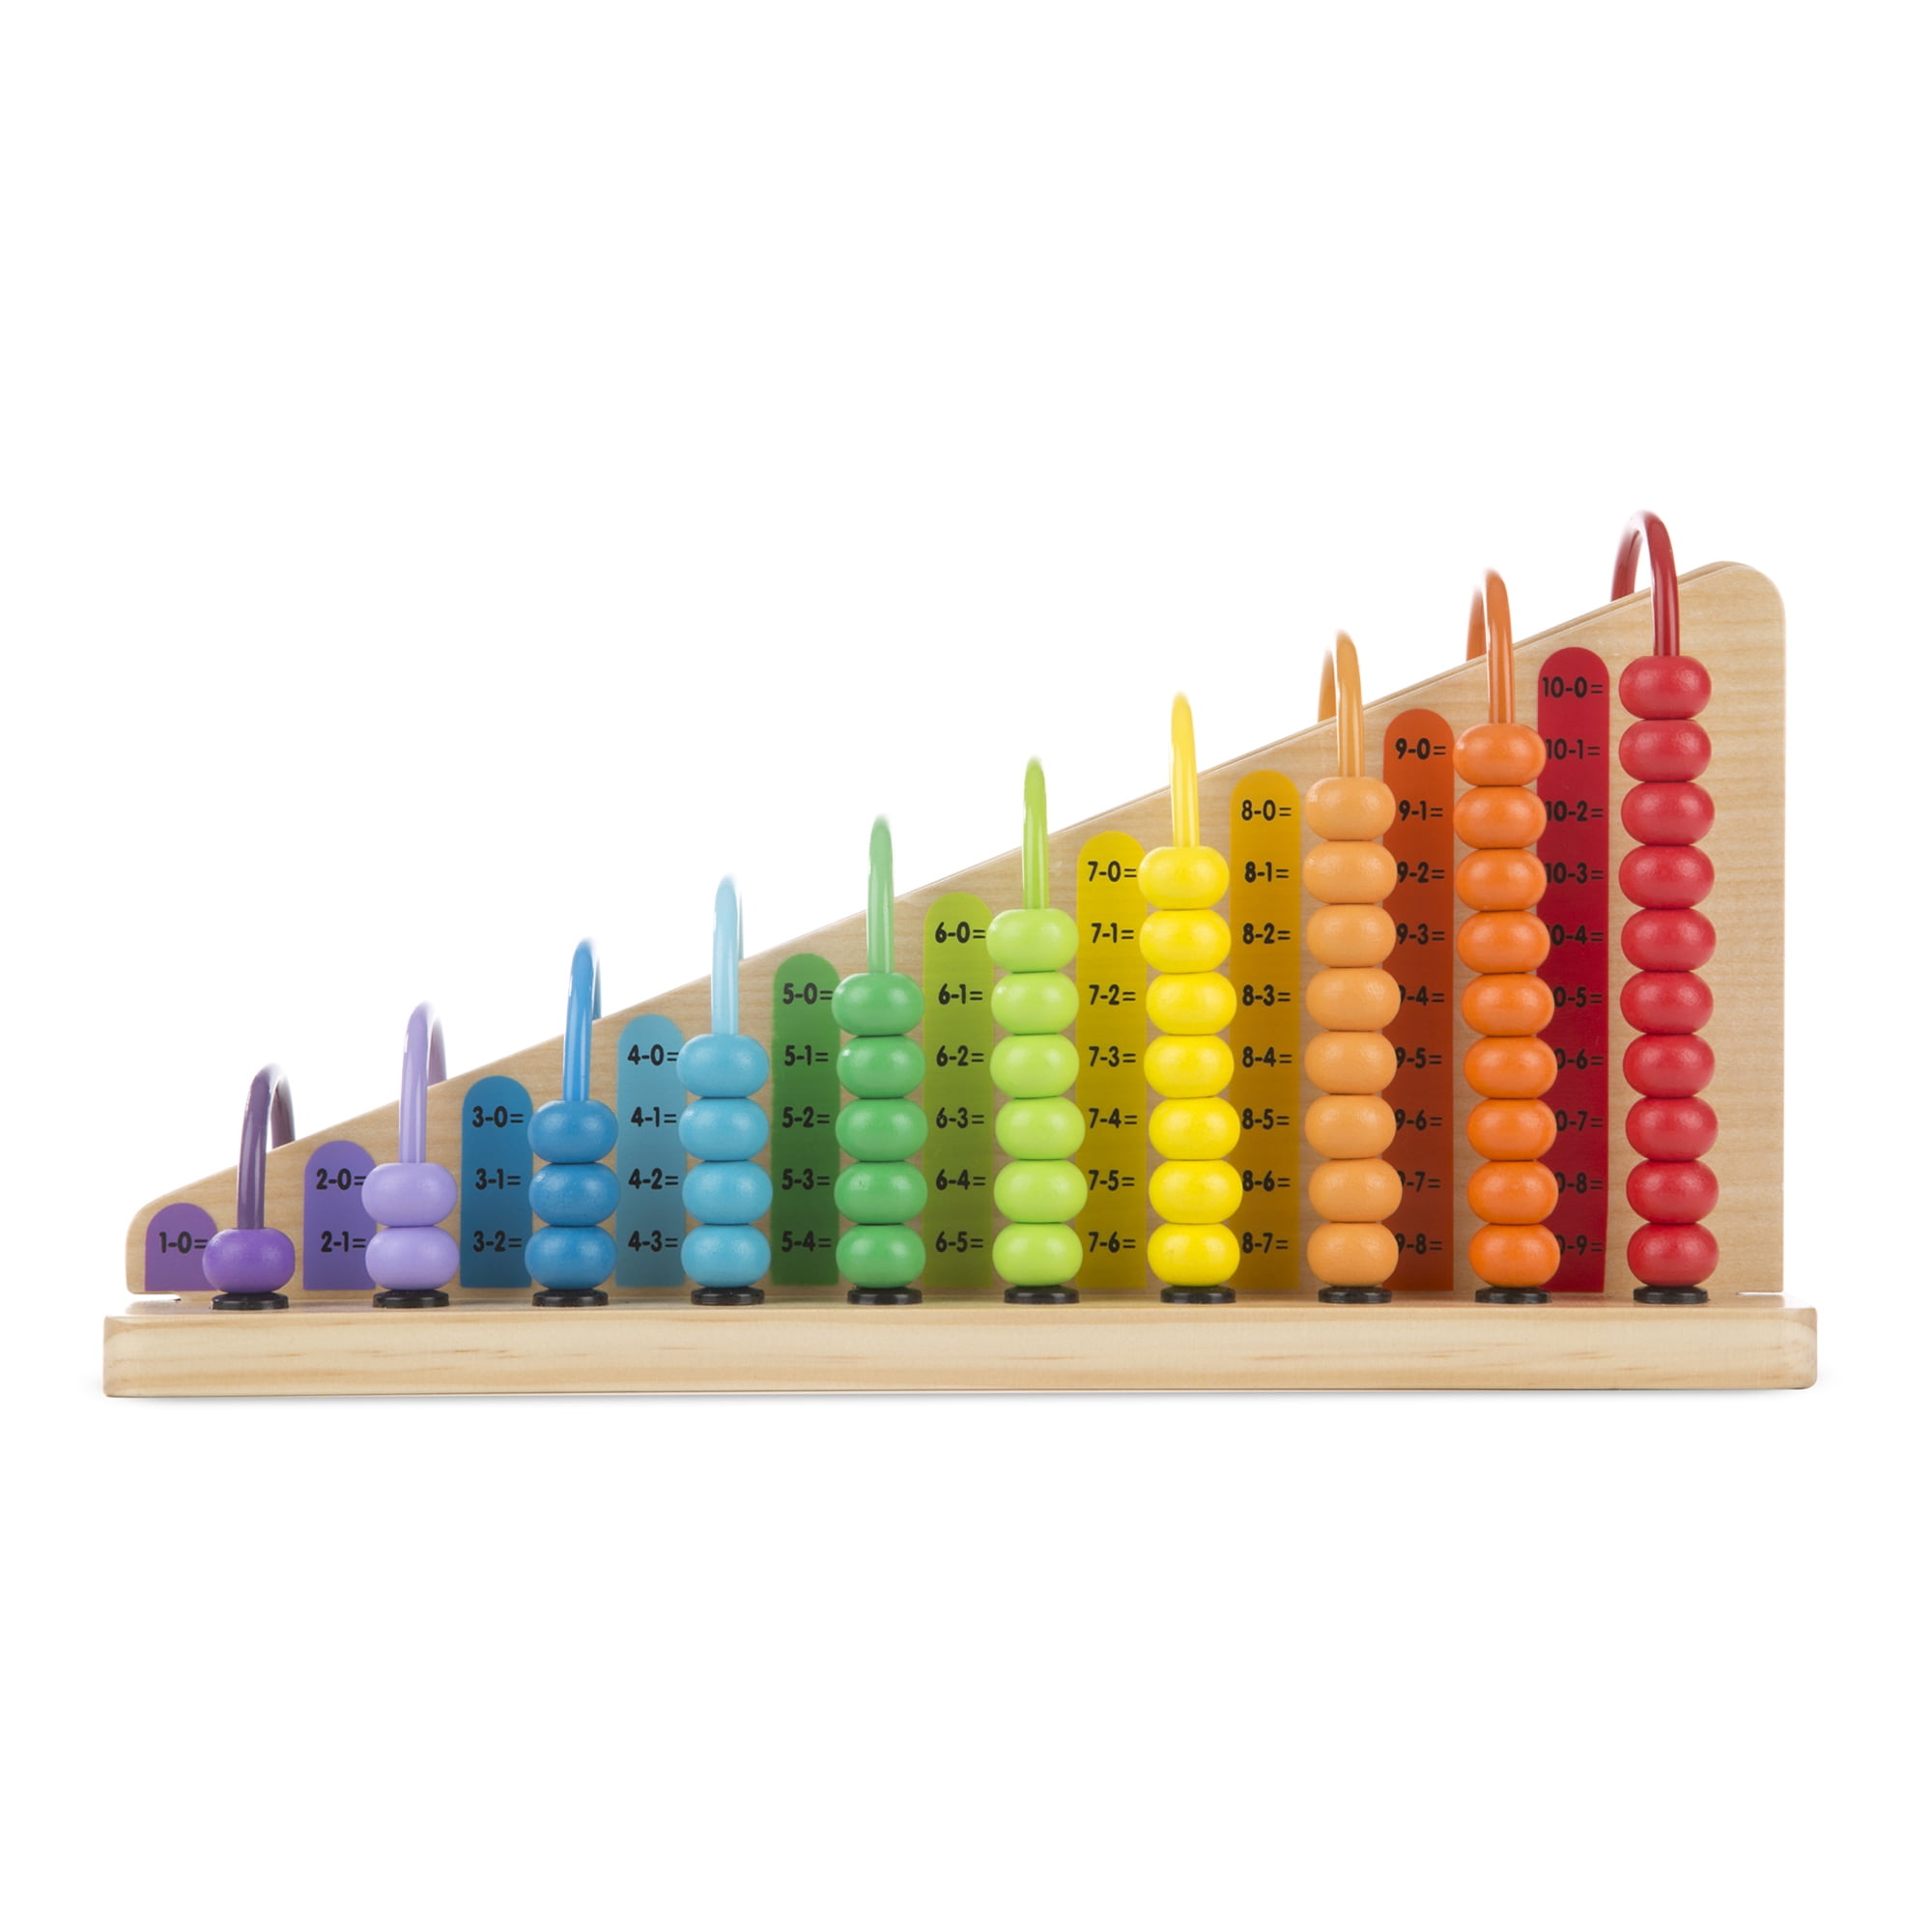 Details about   Classic Abacus Learning Toy Quality Construction 8 Extension Activities Colorful 